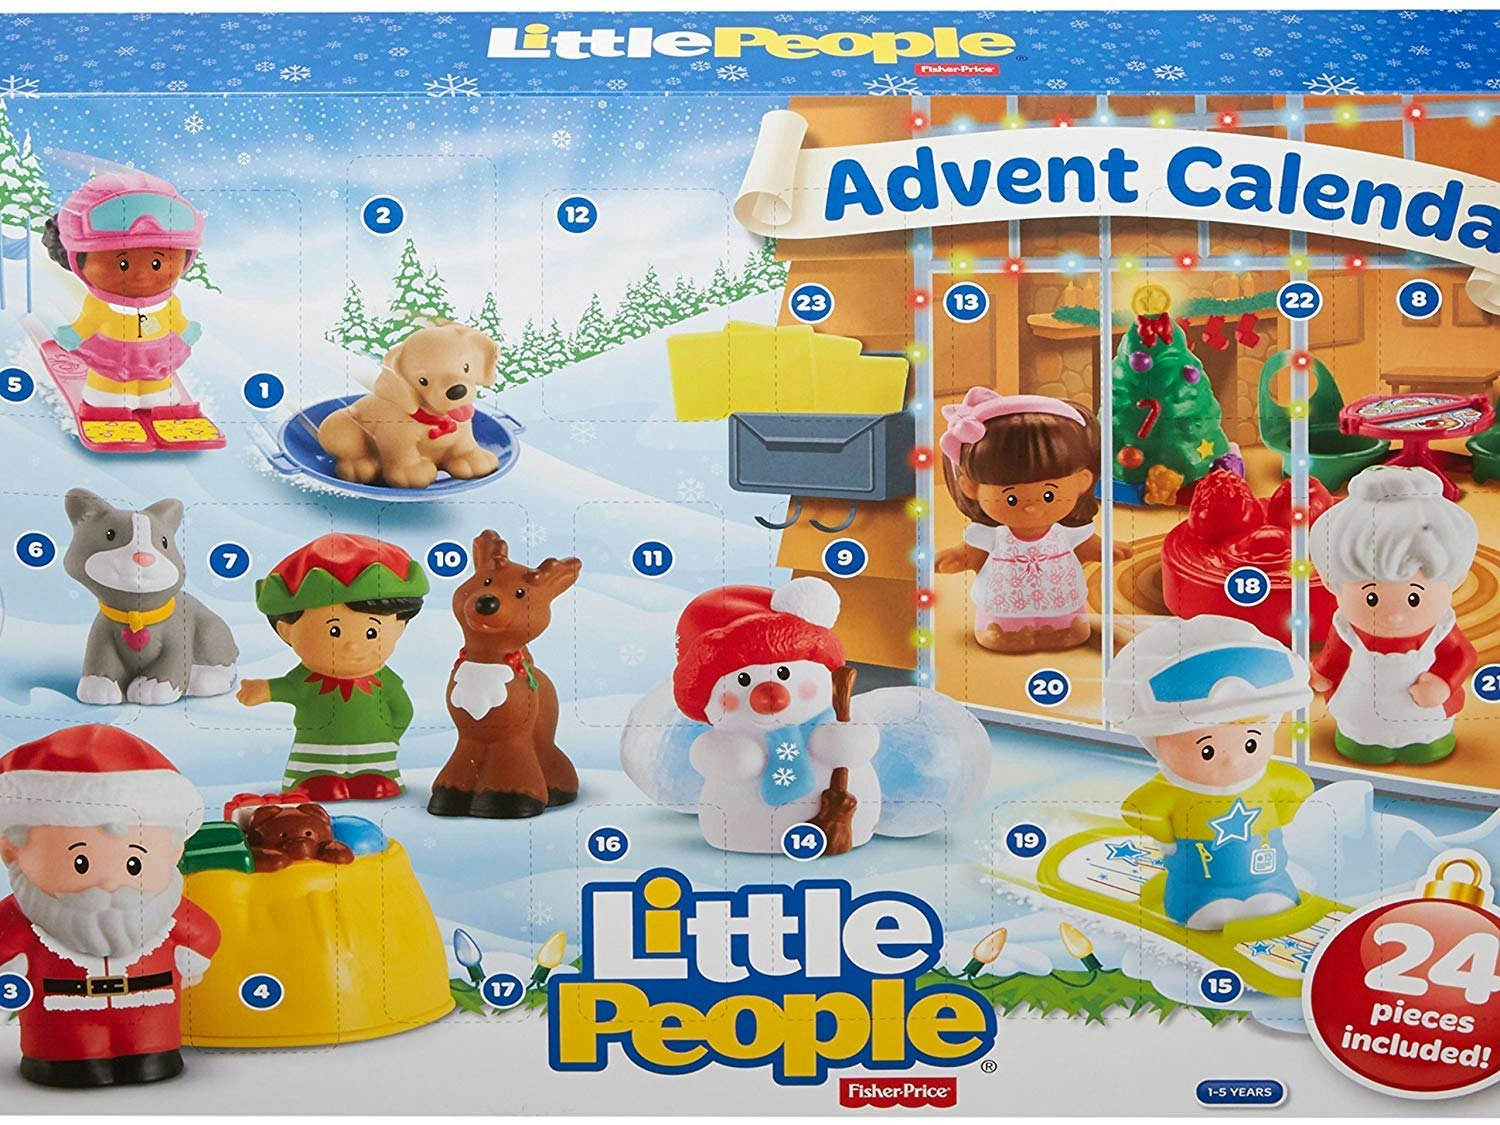 fisher price bible toys